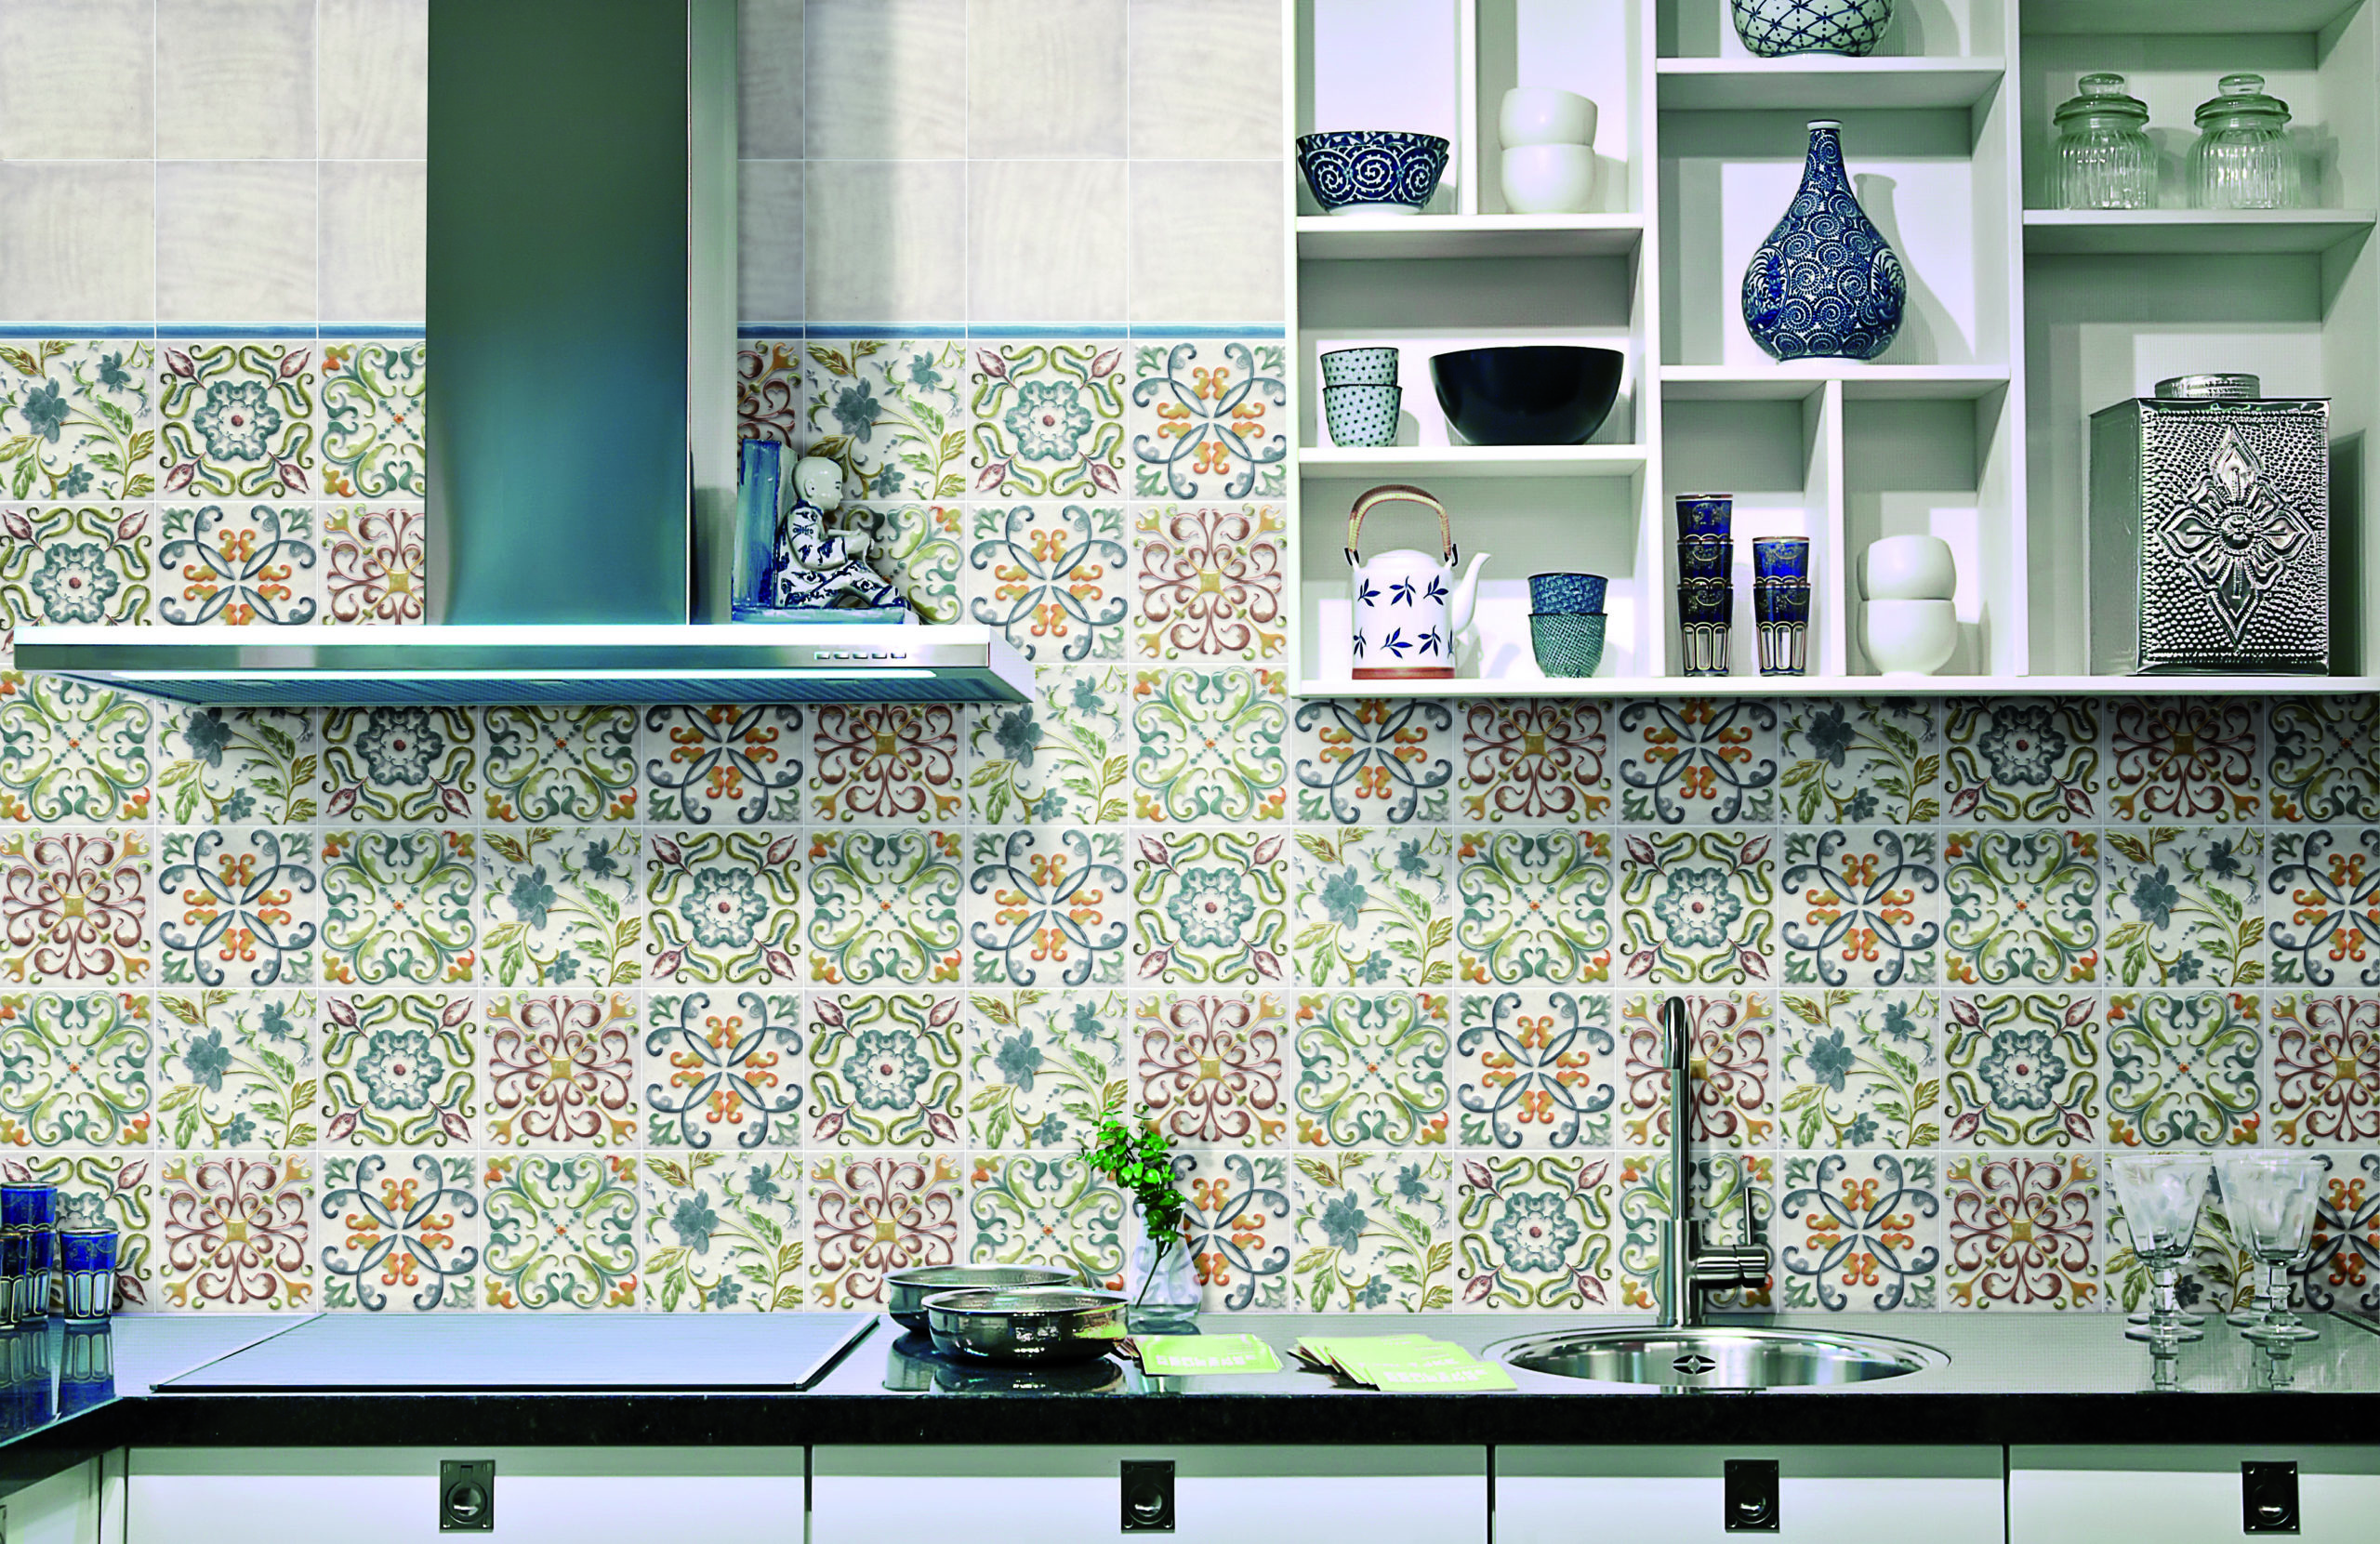 Tile trends hit 2020 with colour, pattern and Moroccan delights